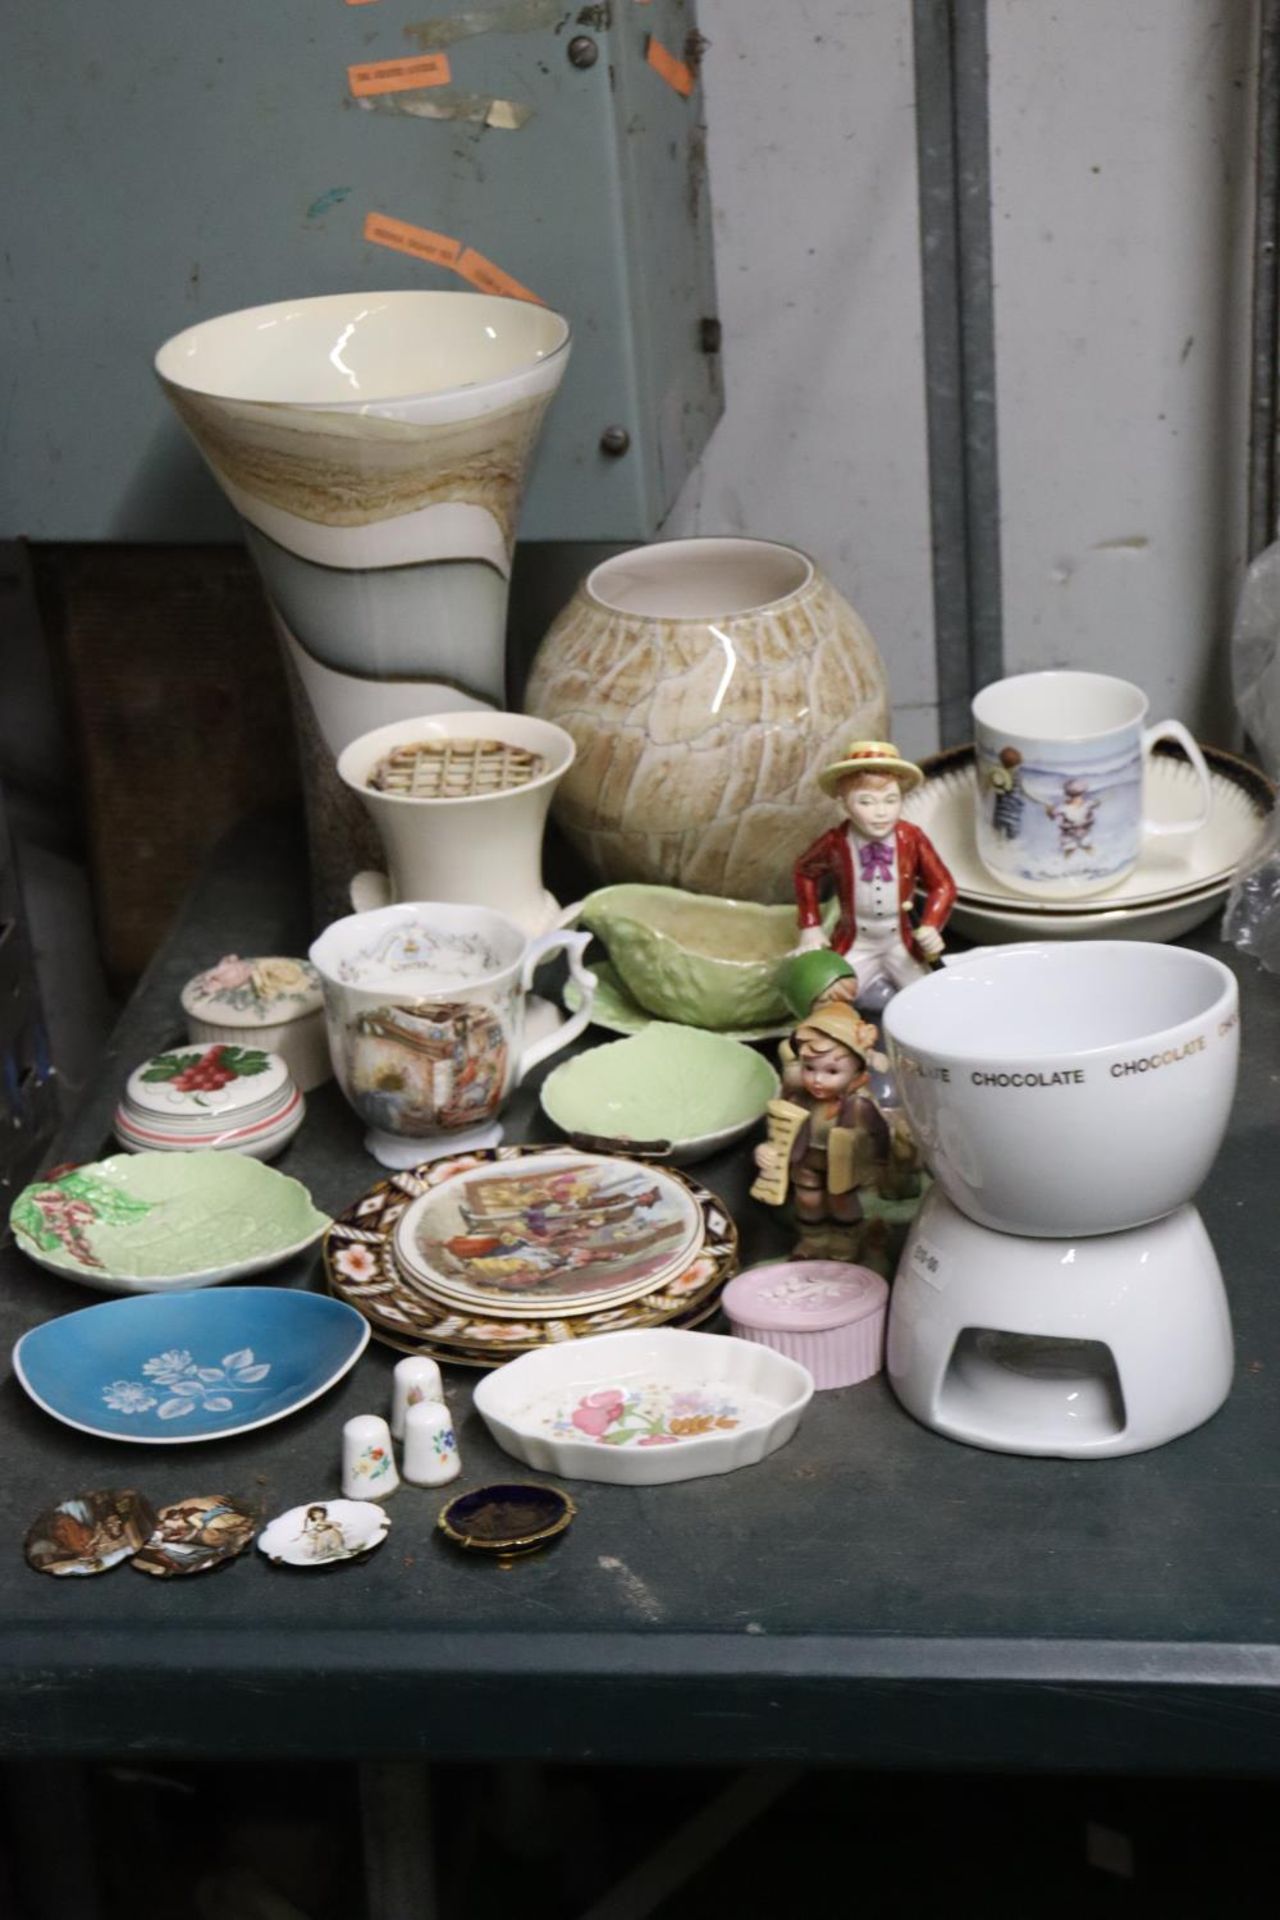 A COLLECTION OF CERAMICS TO INCLUDE FIGURINES, PLATES, VASES ETC